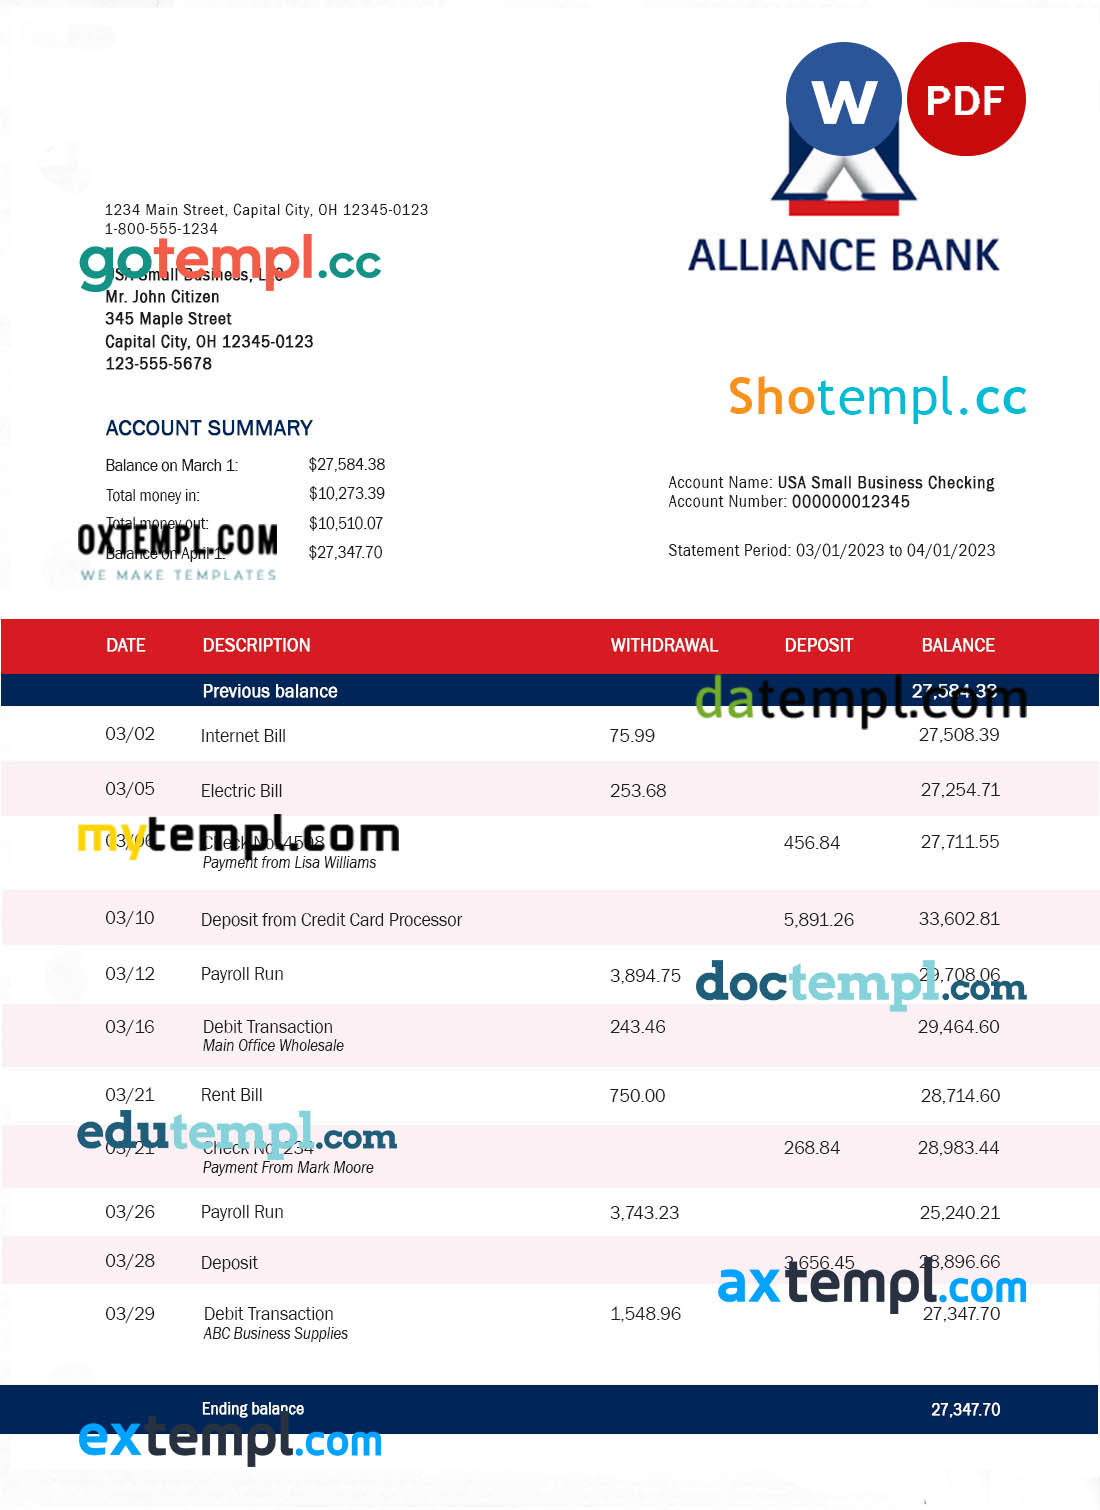 editable template, Alliance Bank enterprise account statement Word and PDF template